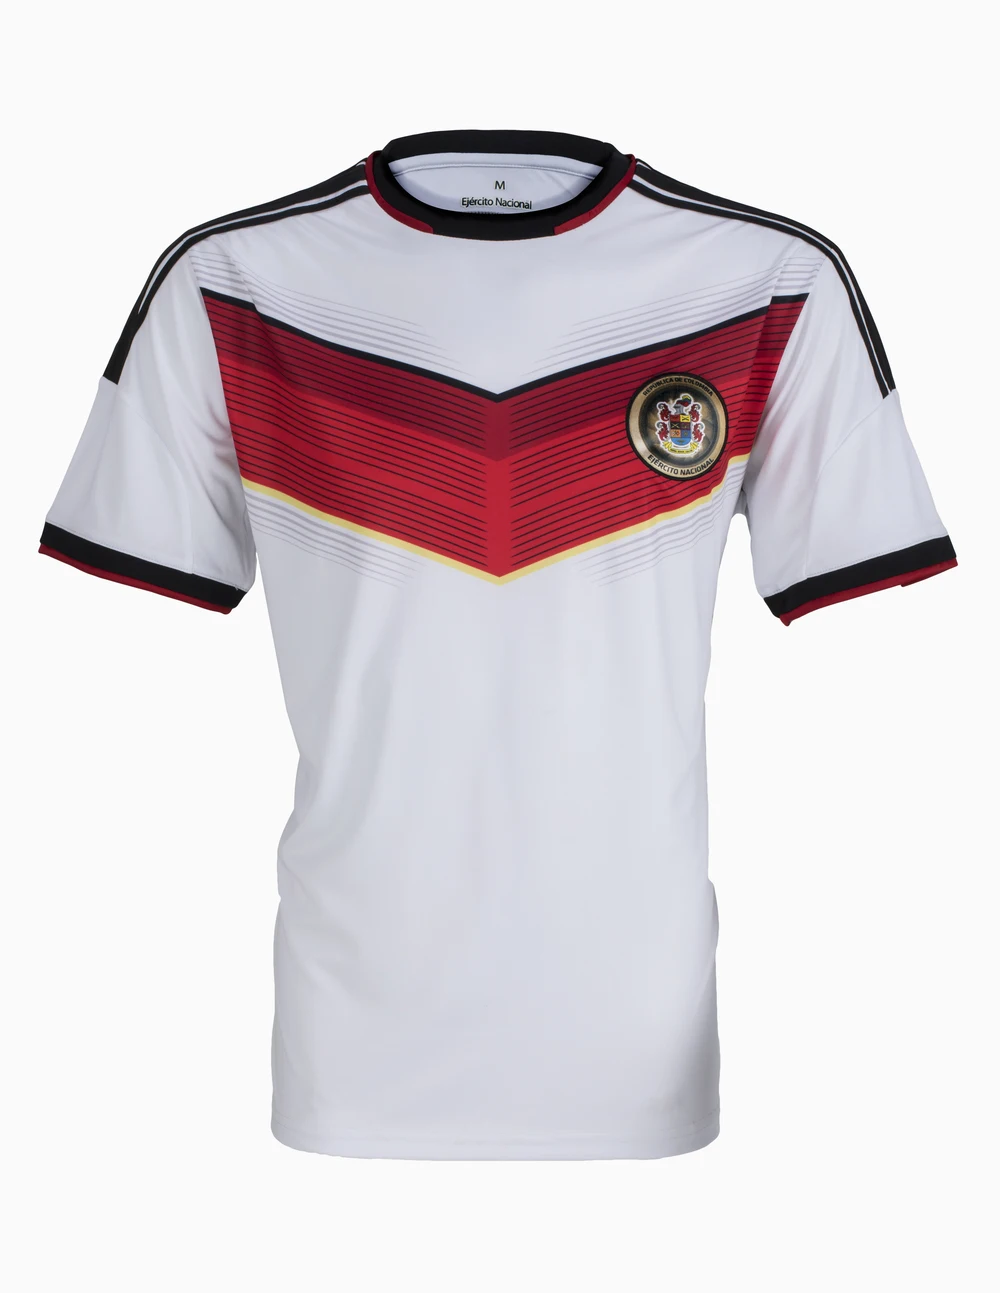 colombia football jersey